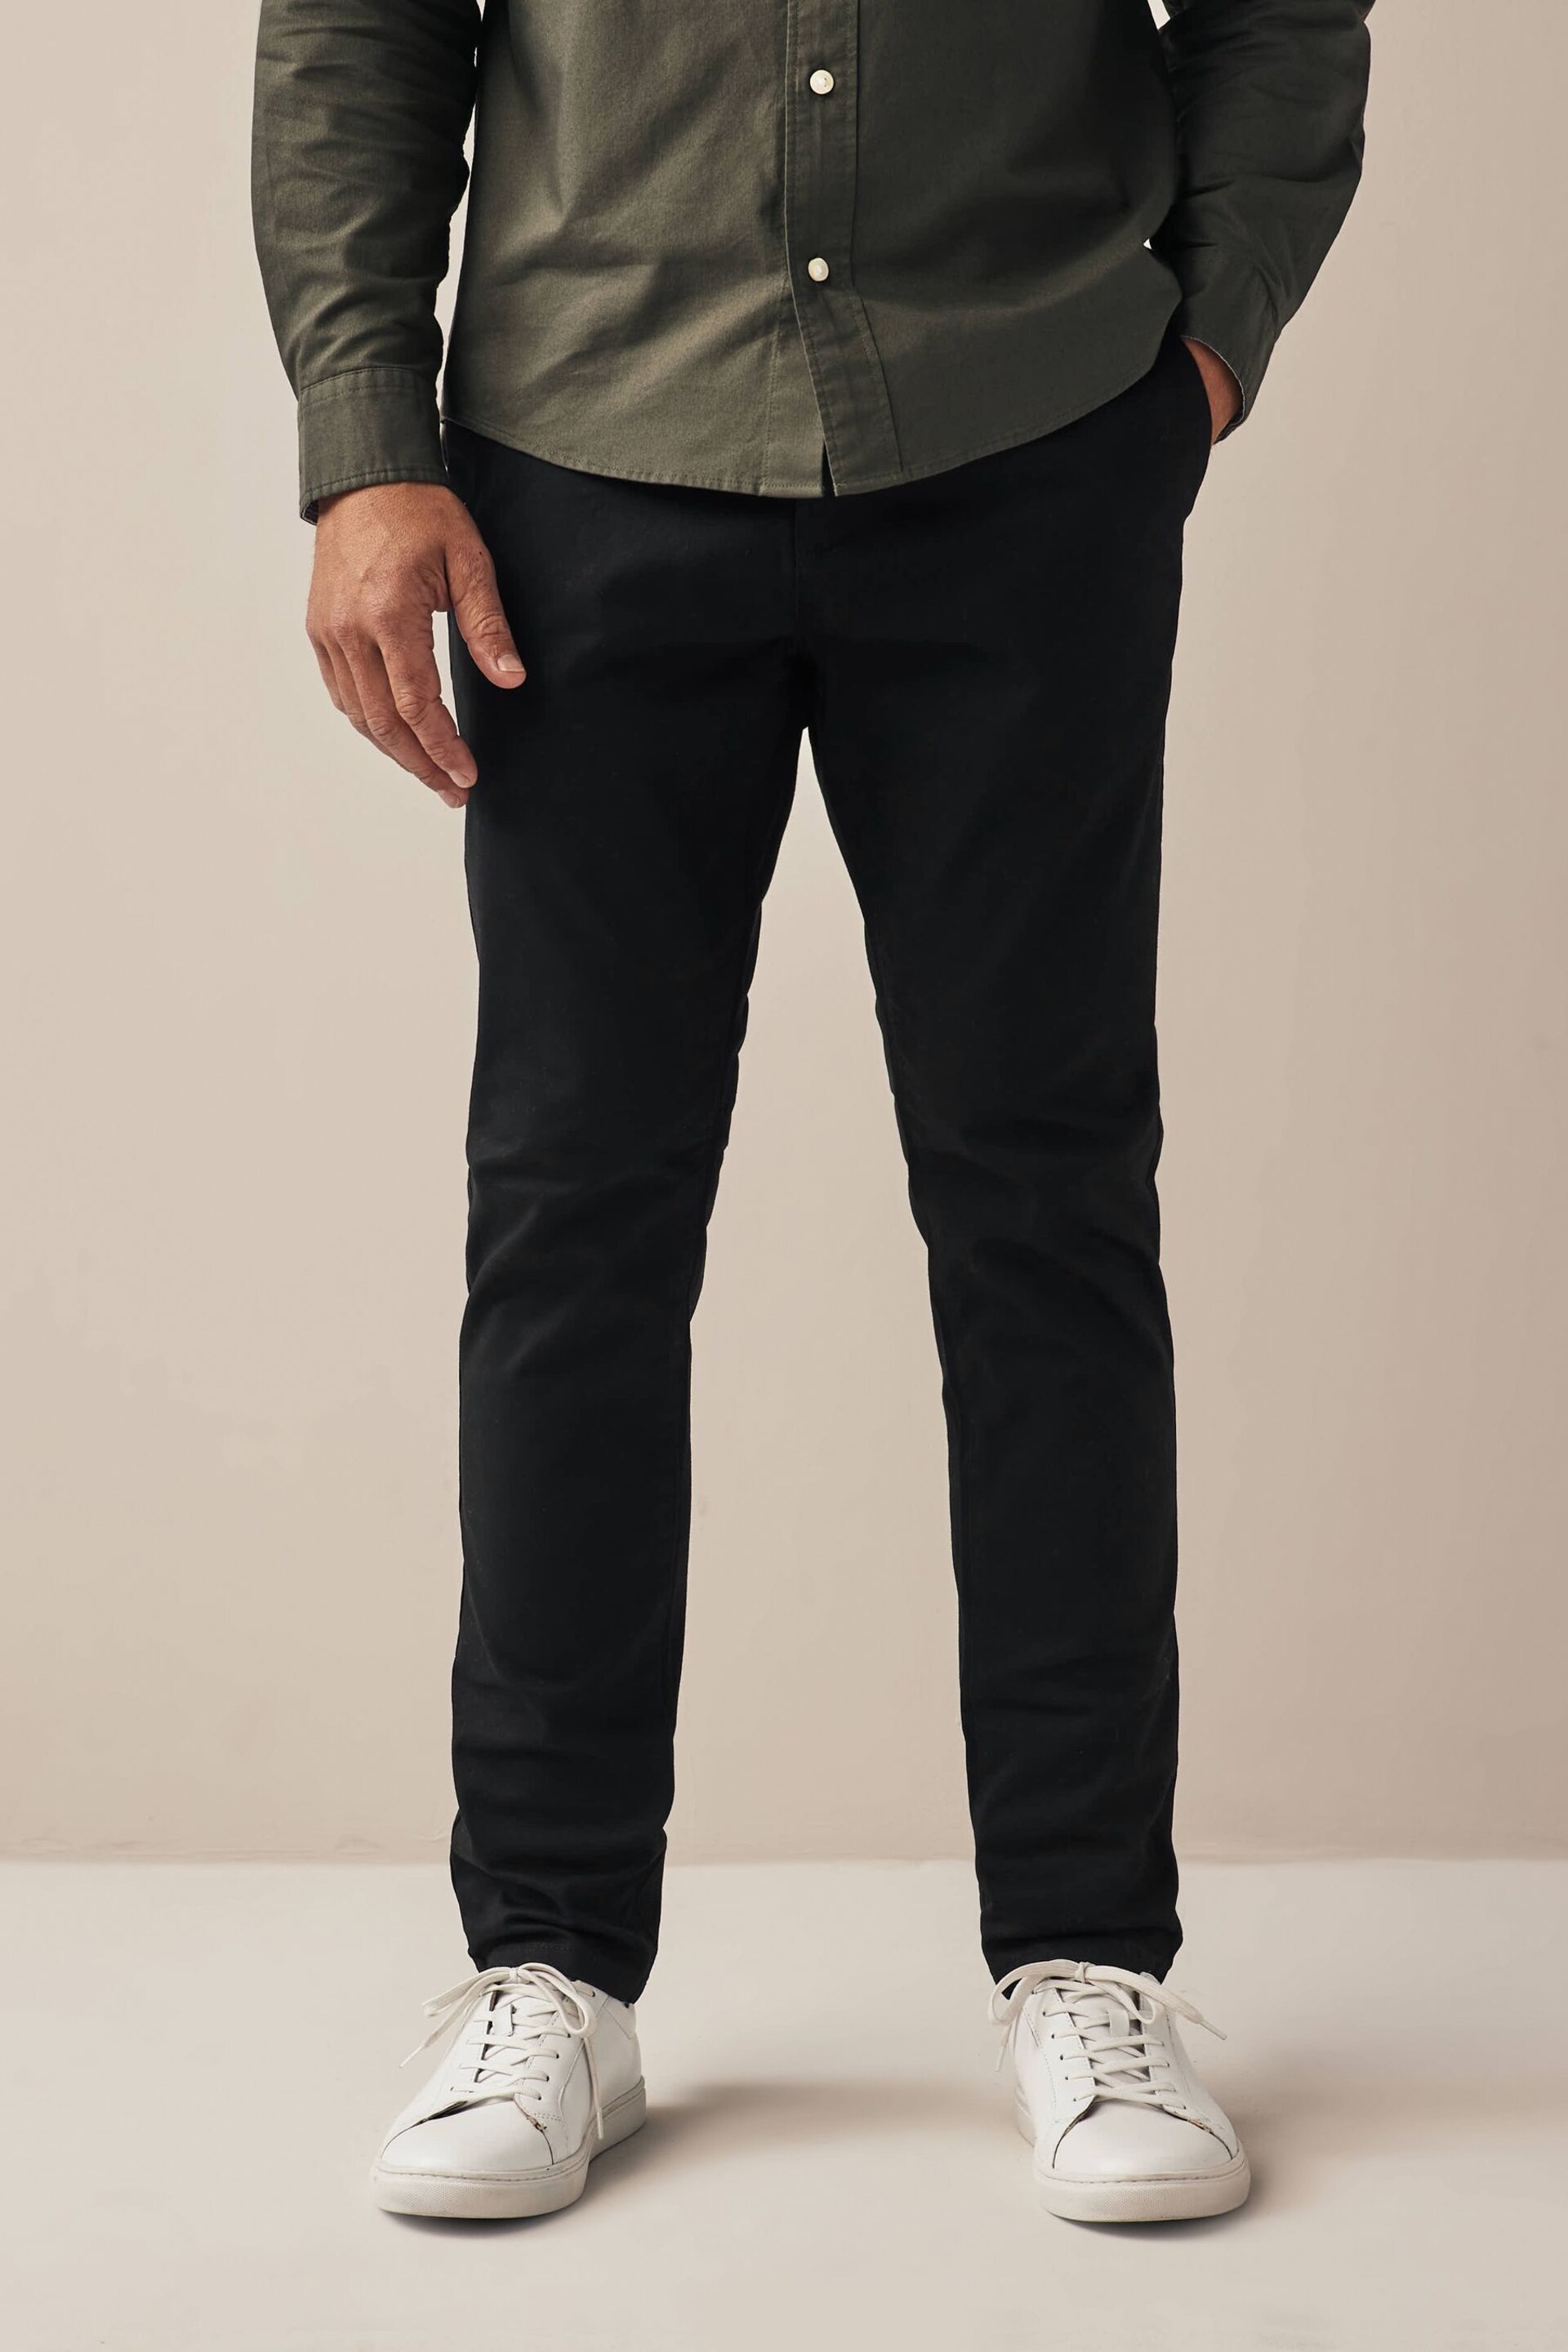 Black Skinny Stretch Chino Trousers 2 Pack - Image 4 of 9